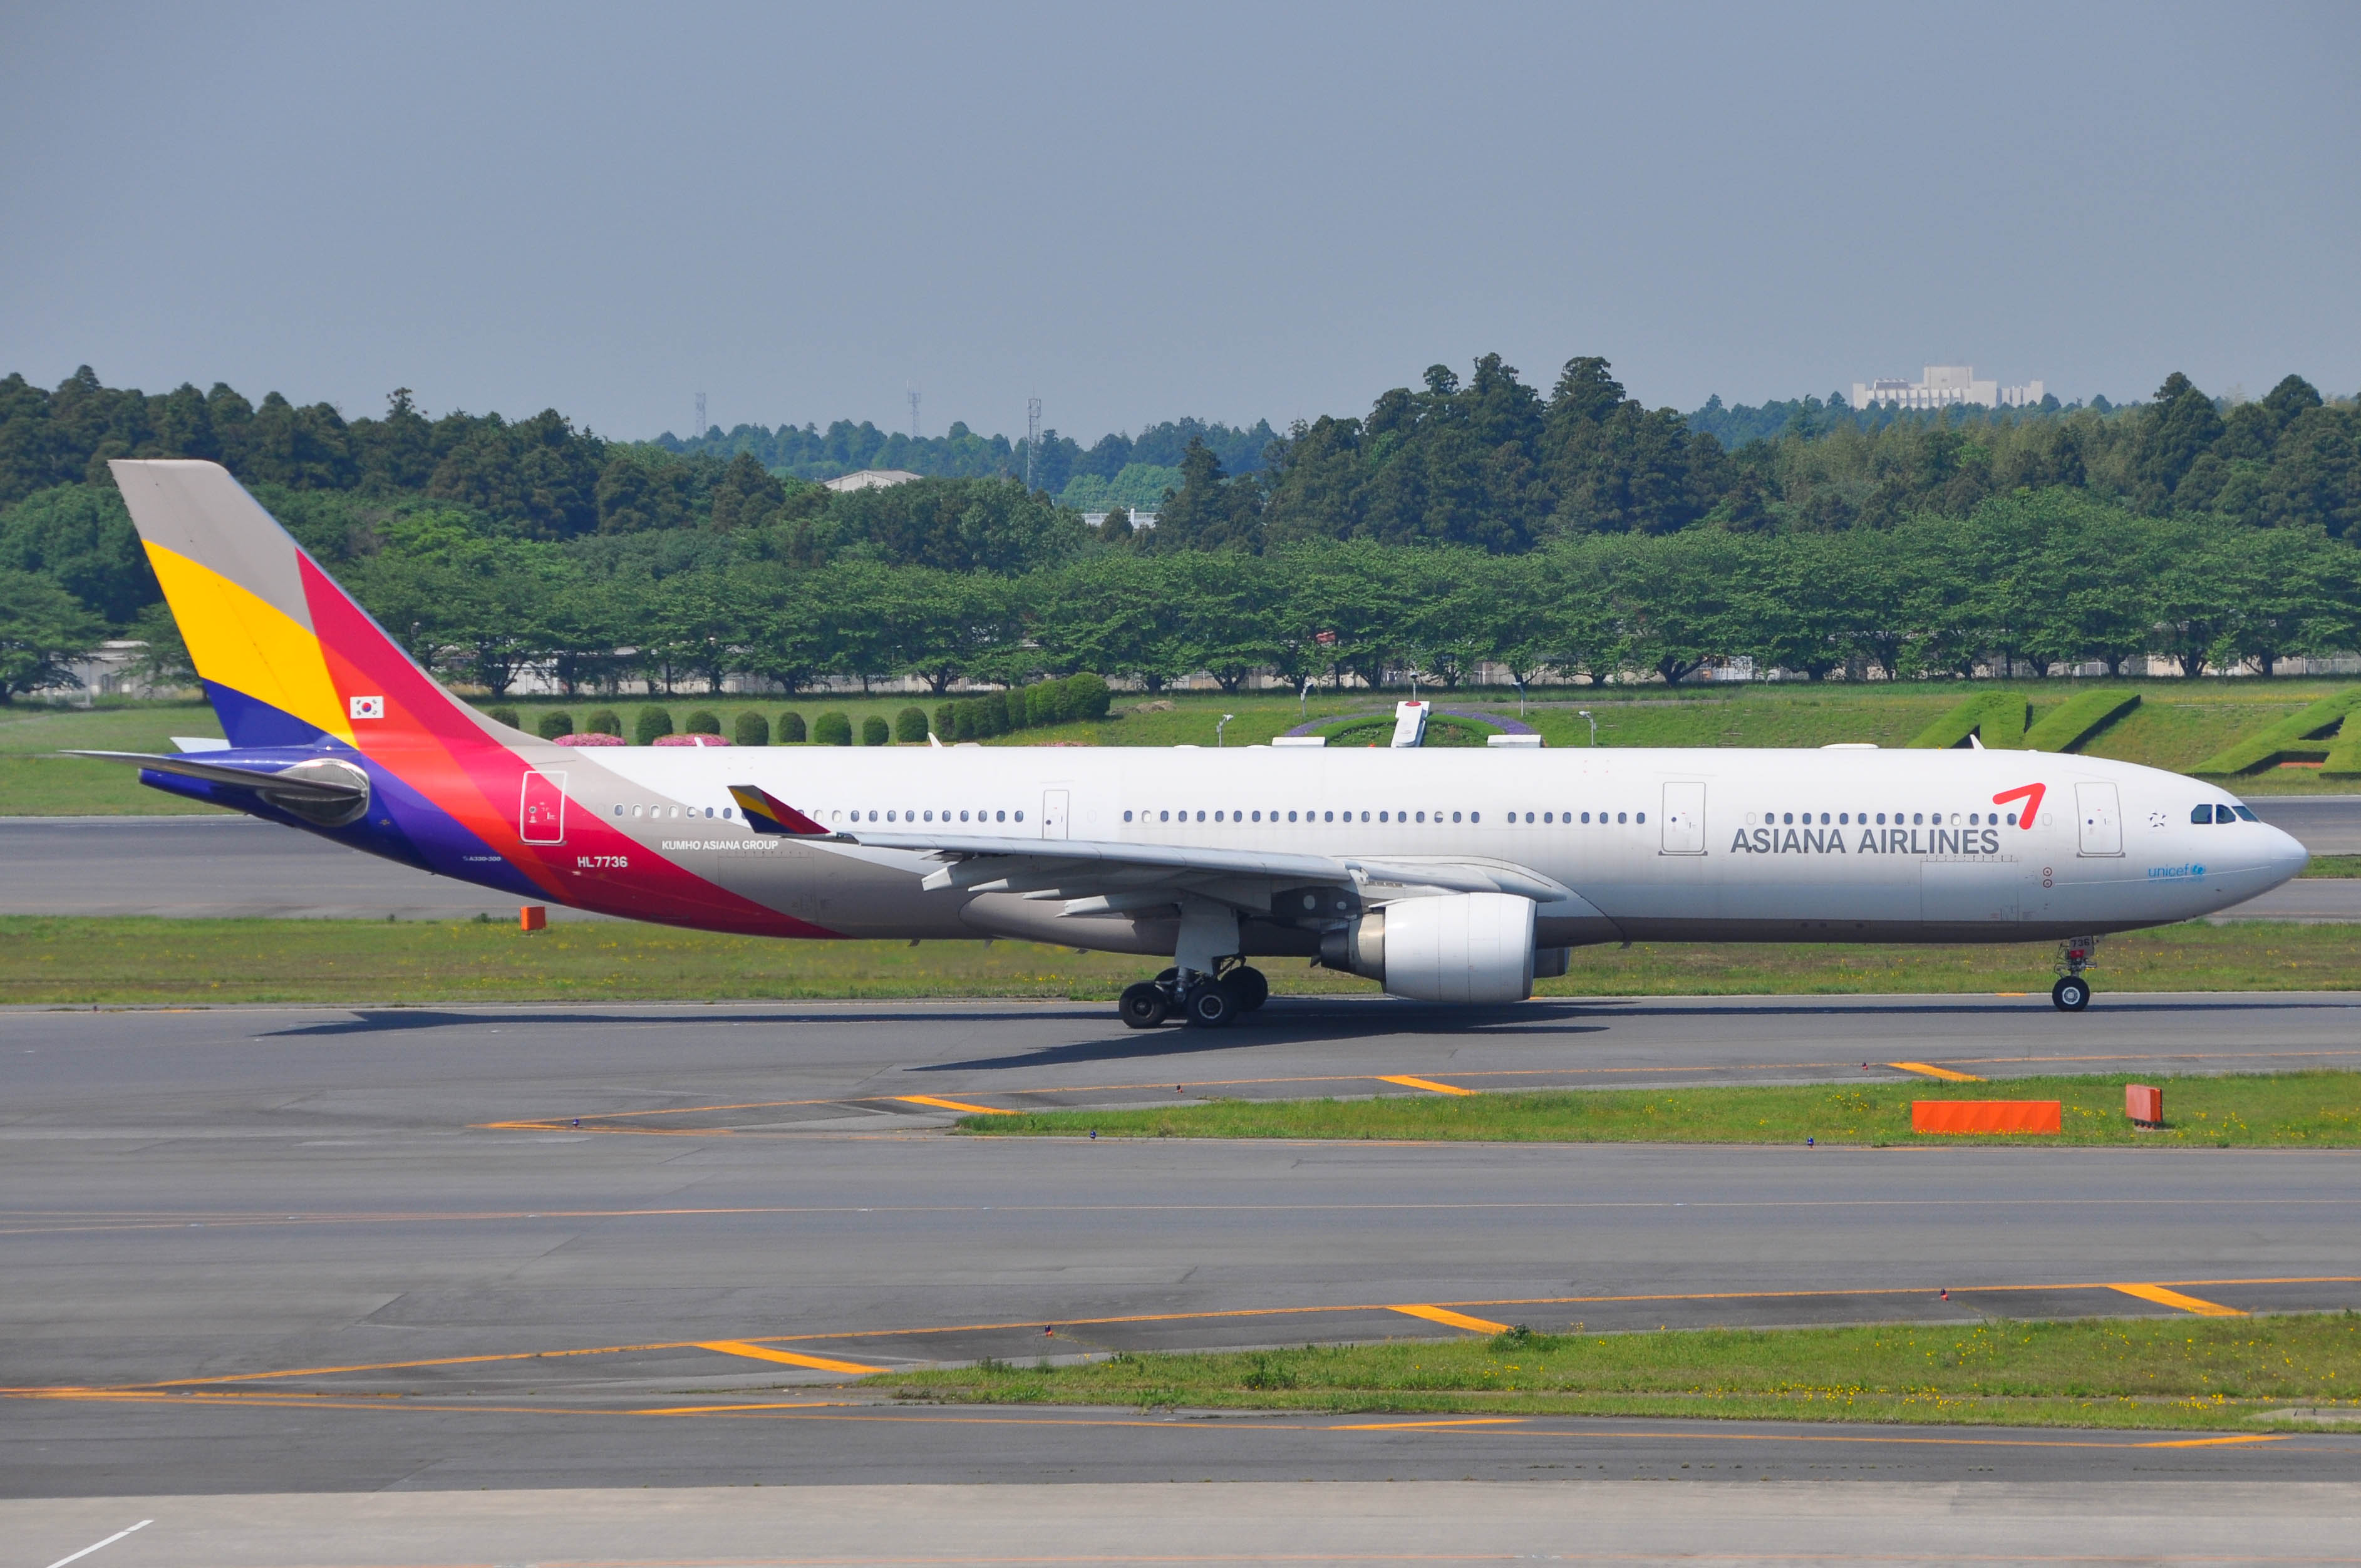 HL7736/HL7736 Asiana Airlines Airbus A330 Airframe Information - AVSpotters.com